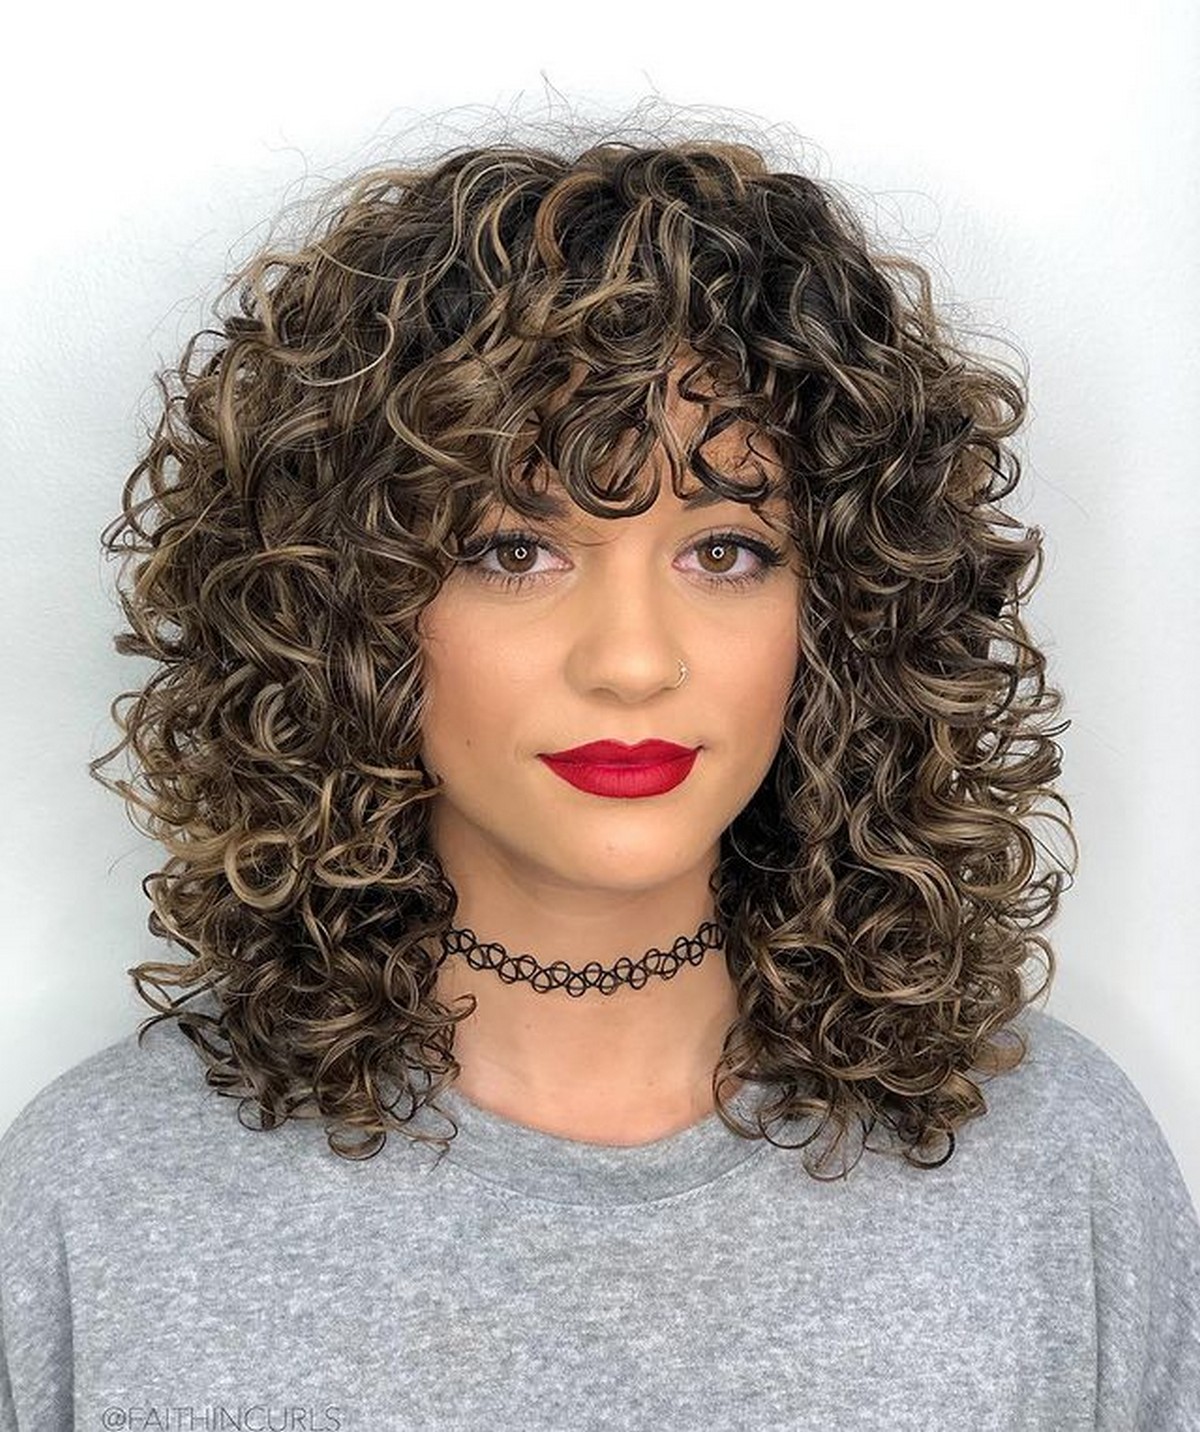 Mid-Length Curly Hairstyle With Curly Bangs